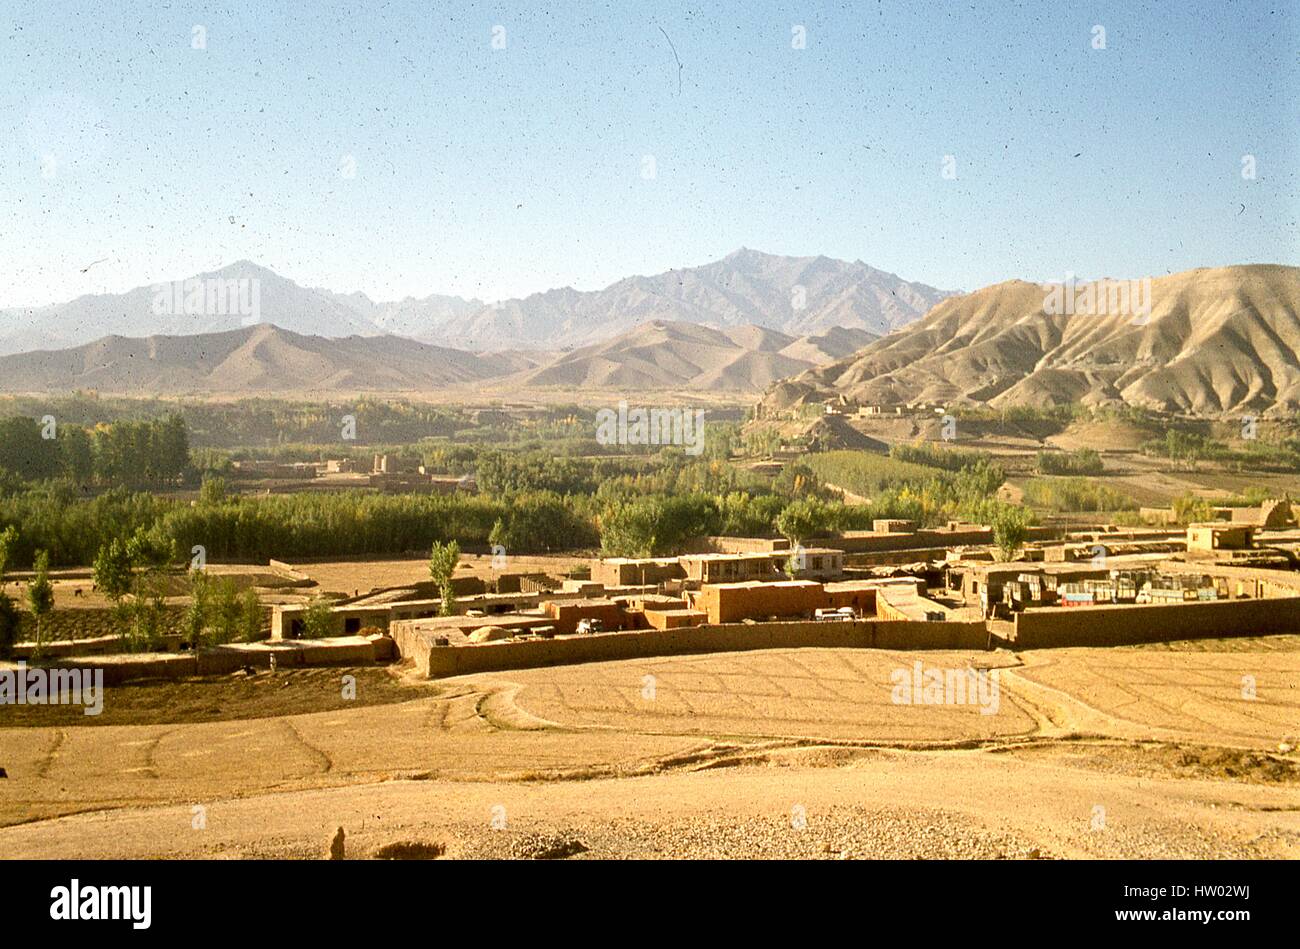 Panoramic view of the Hindu Kush mountains framing the small houses in valley town of Bamiyan, located in the Hazarajat region of central Afghanistan, November, 1975. Stock Photo